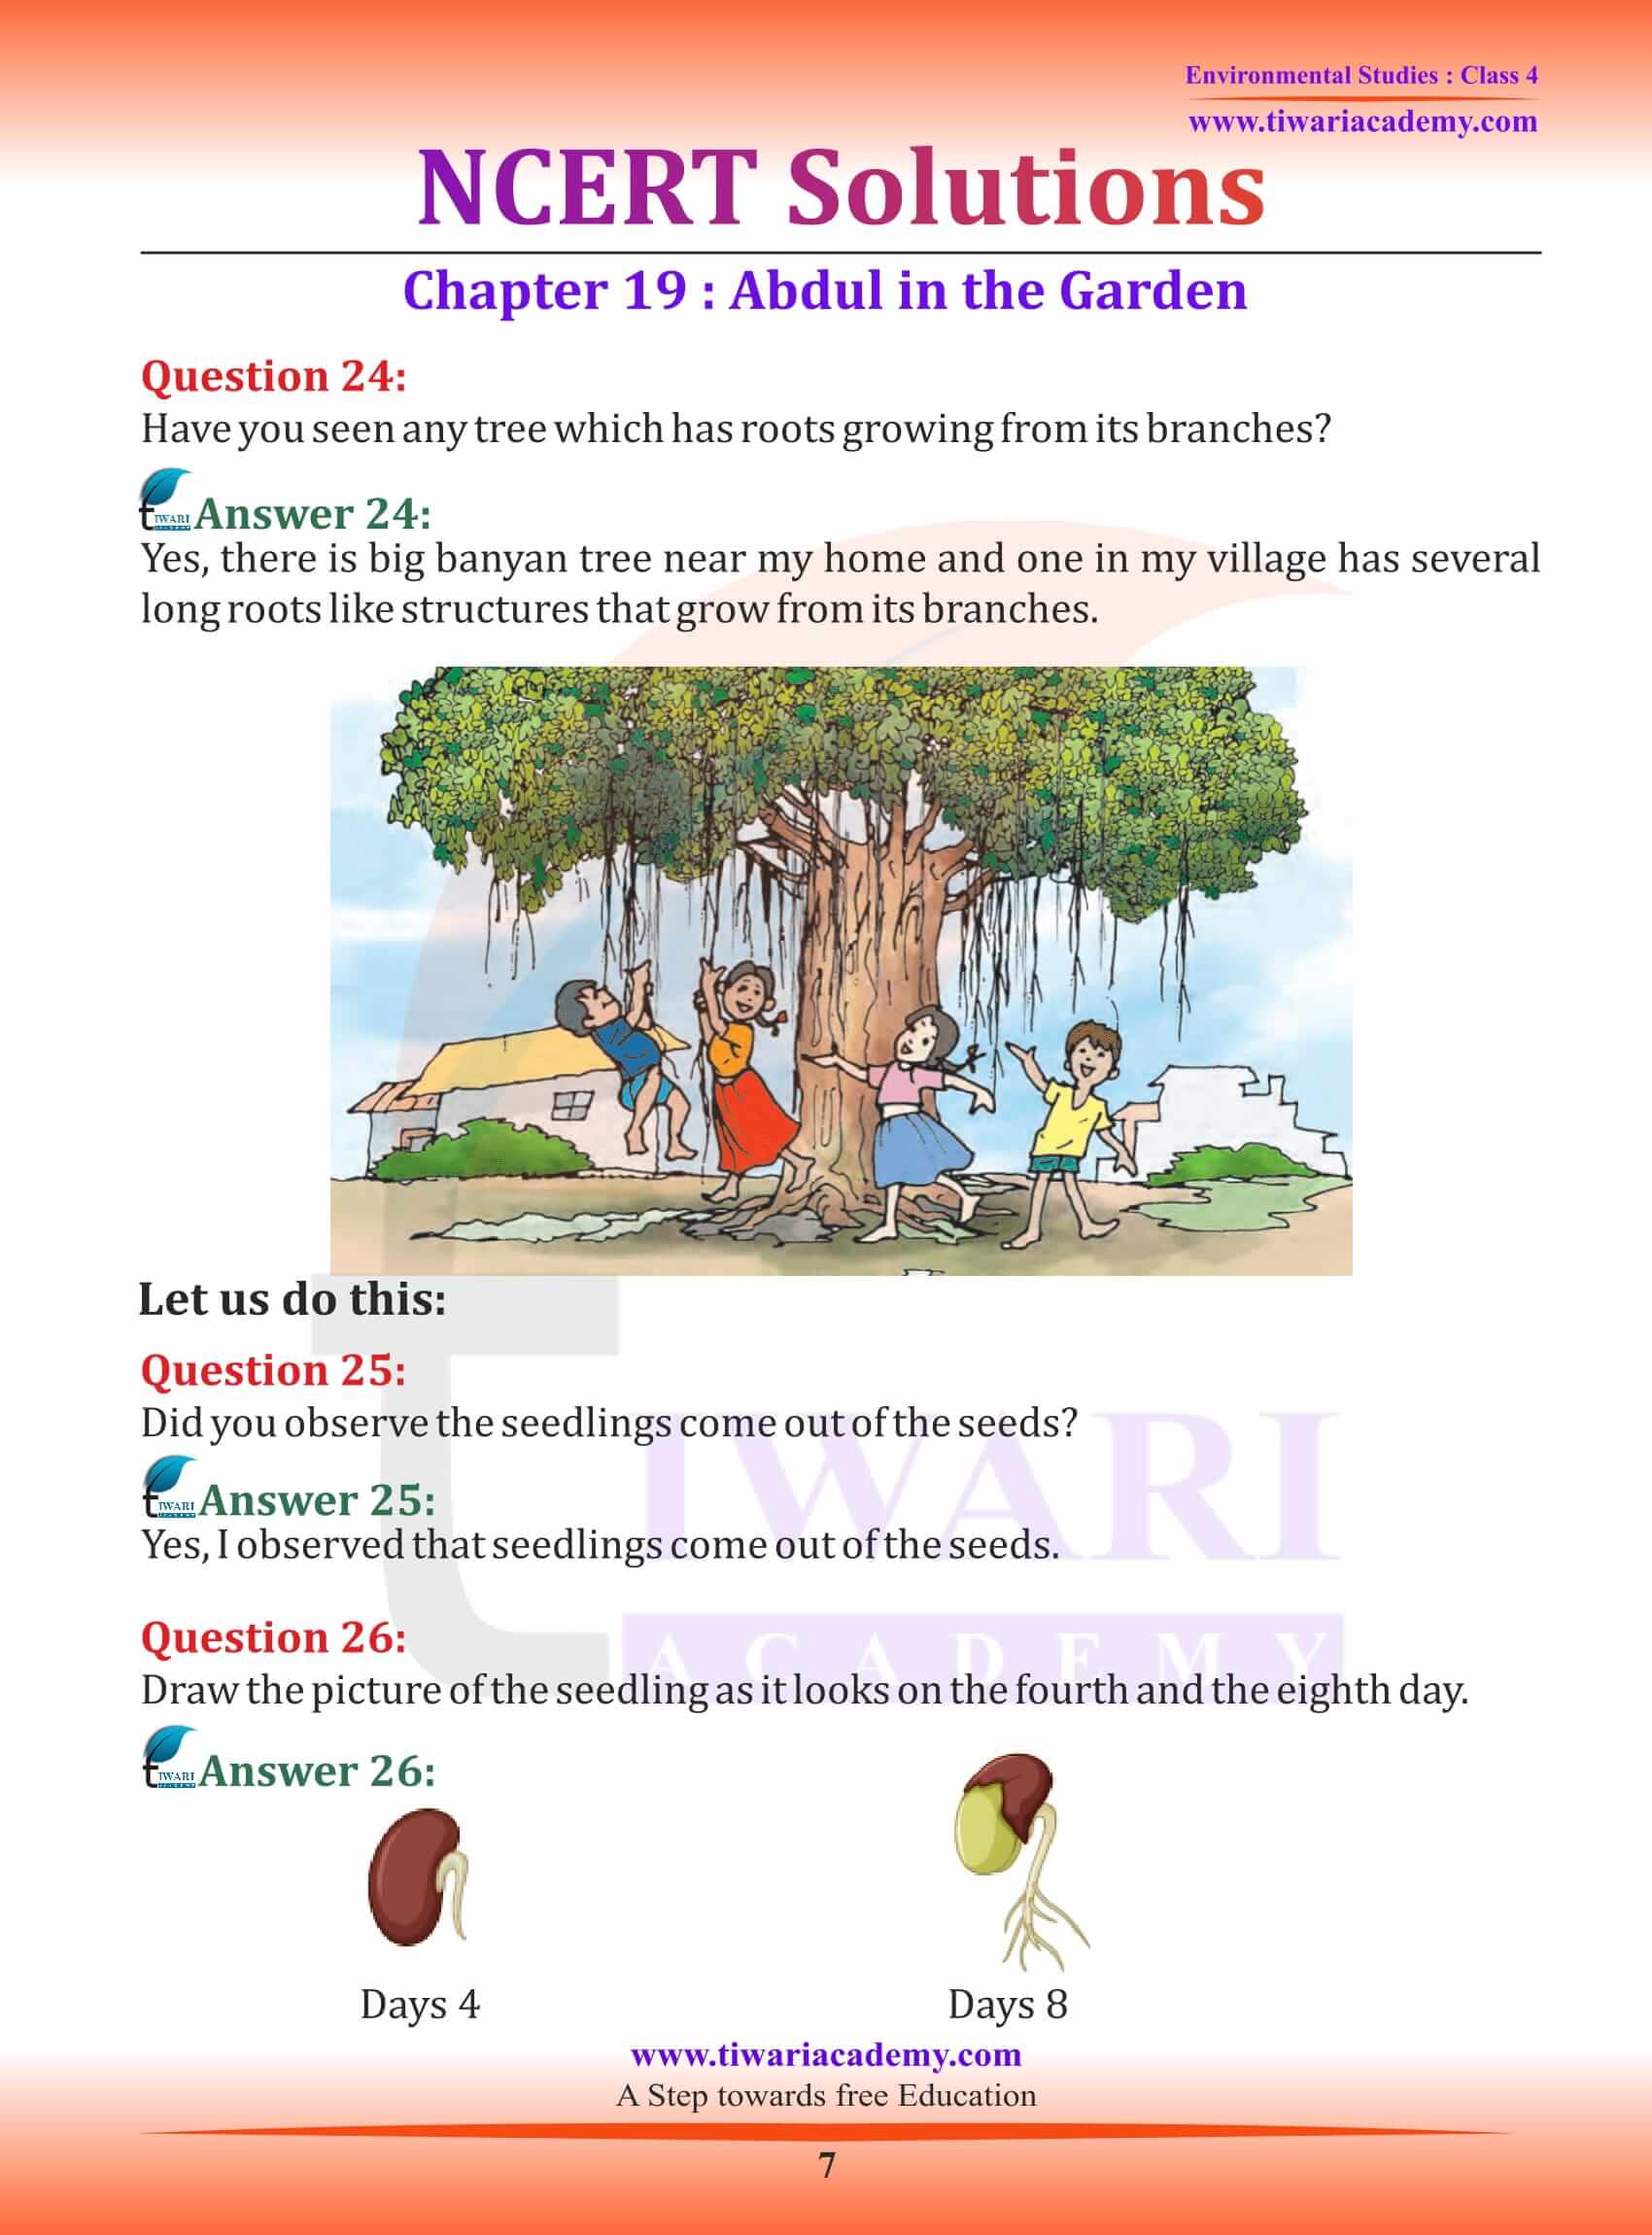 NCERT Solutions for Class 4 EVS Chapter 19 question answers